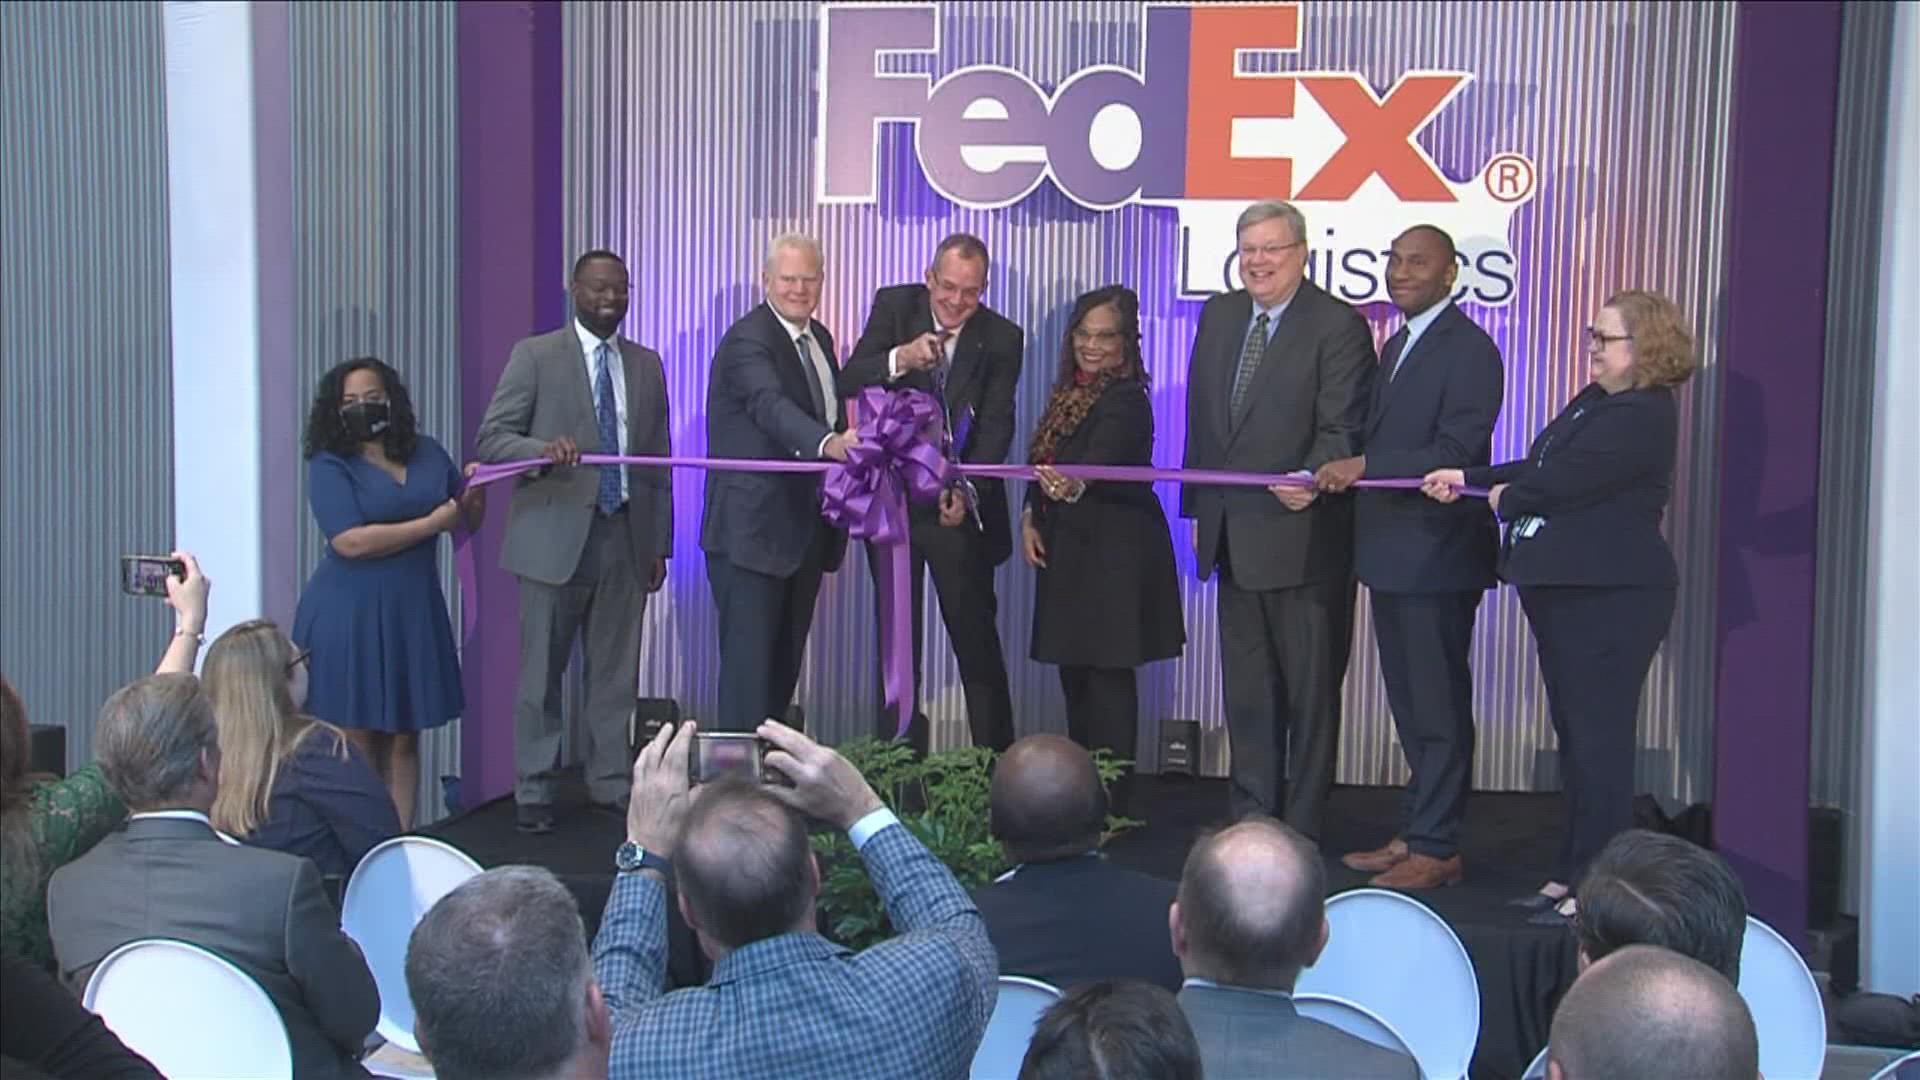 Shipping giant FedEx Corp. says its logistics subsidiary has opened a new global headquarters in downtown Memphis, Tennessee.